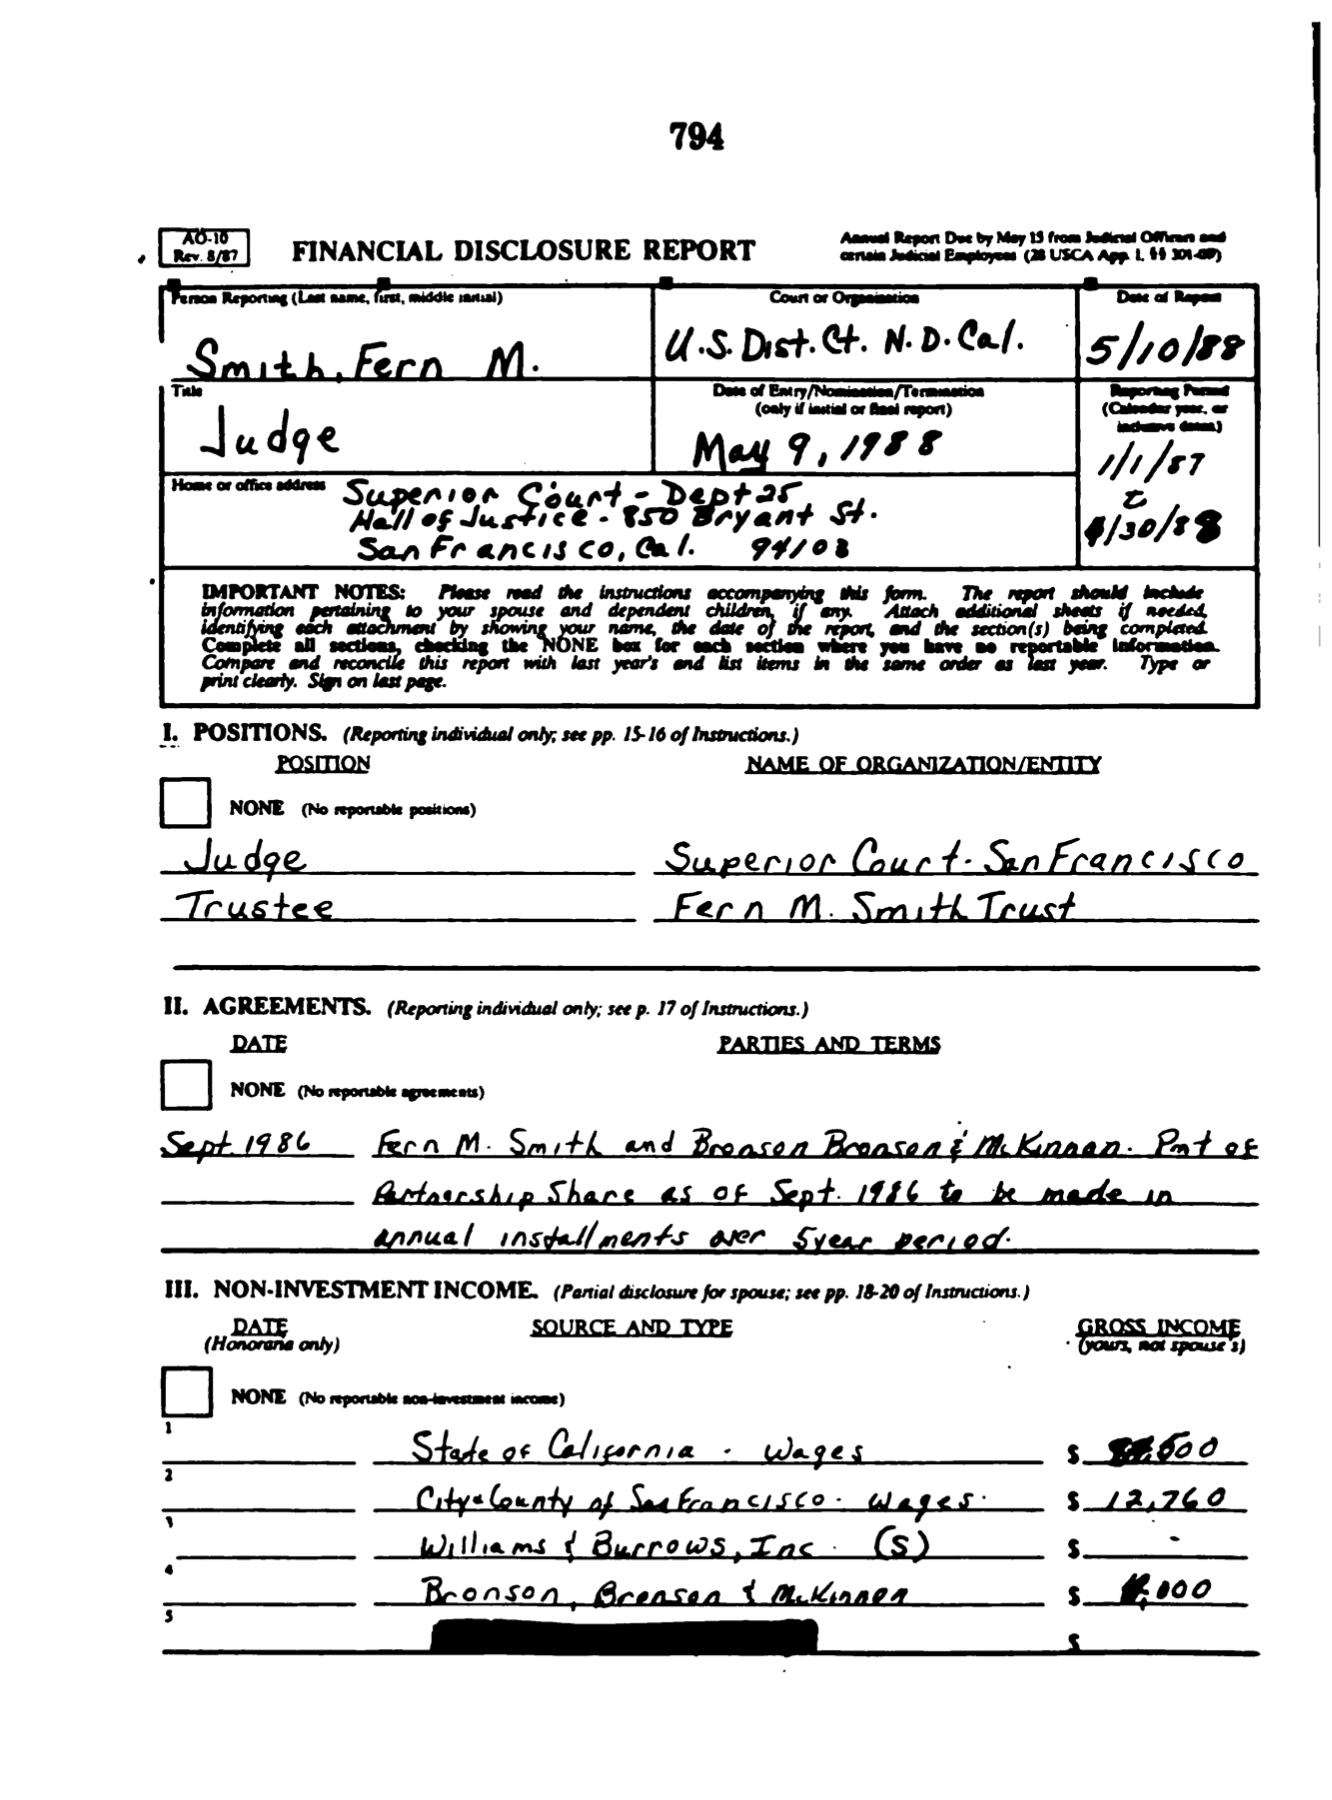 An example of a Senate Nomination Record